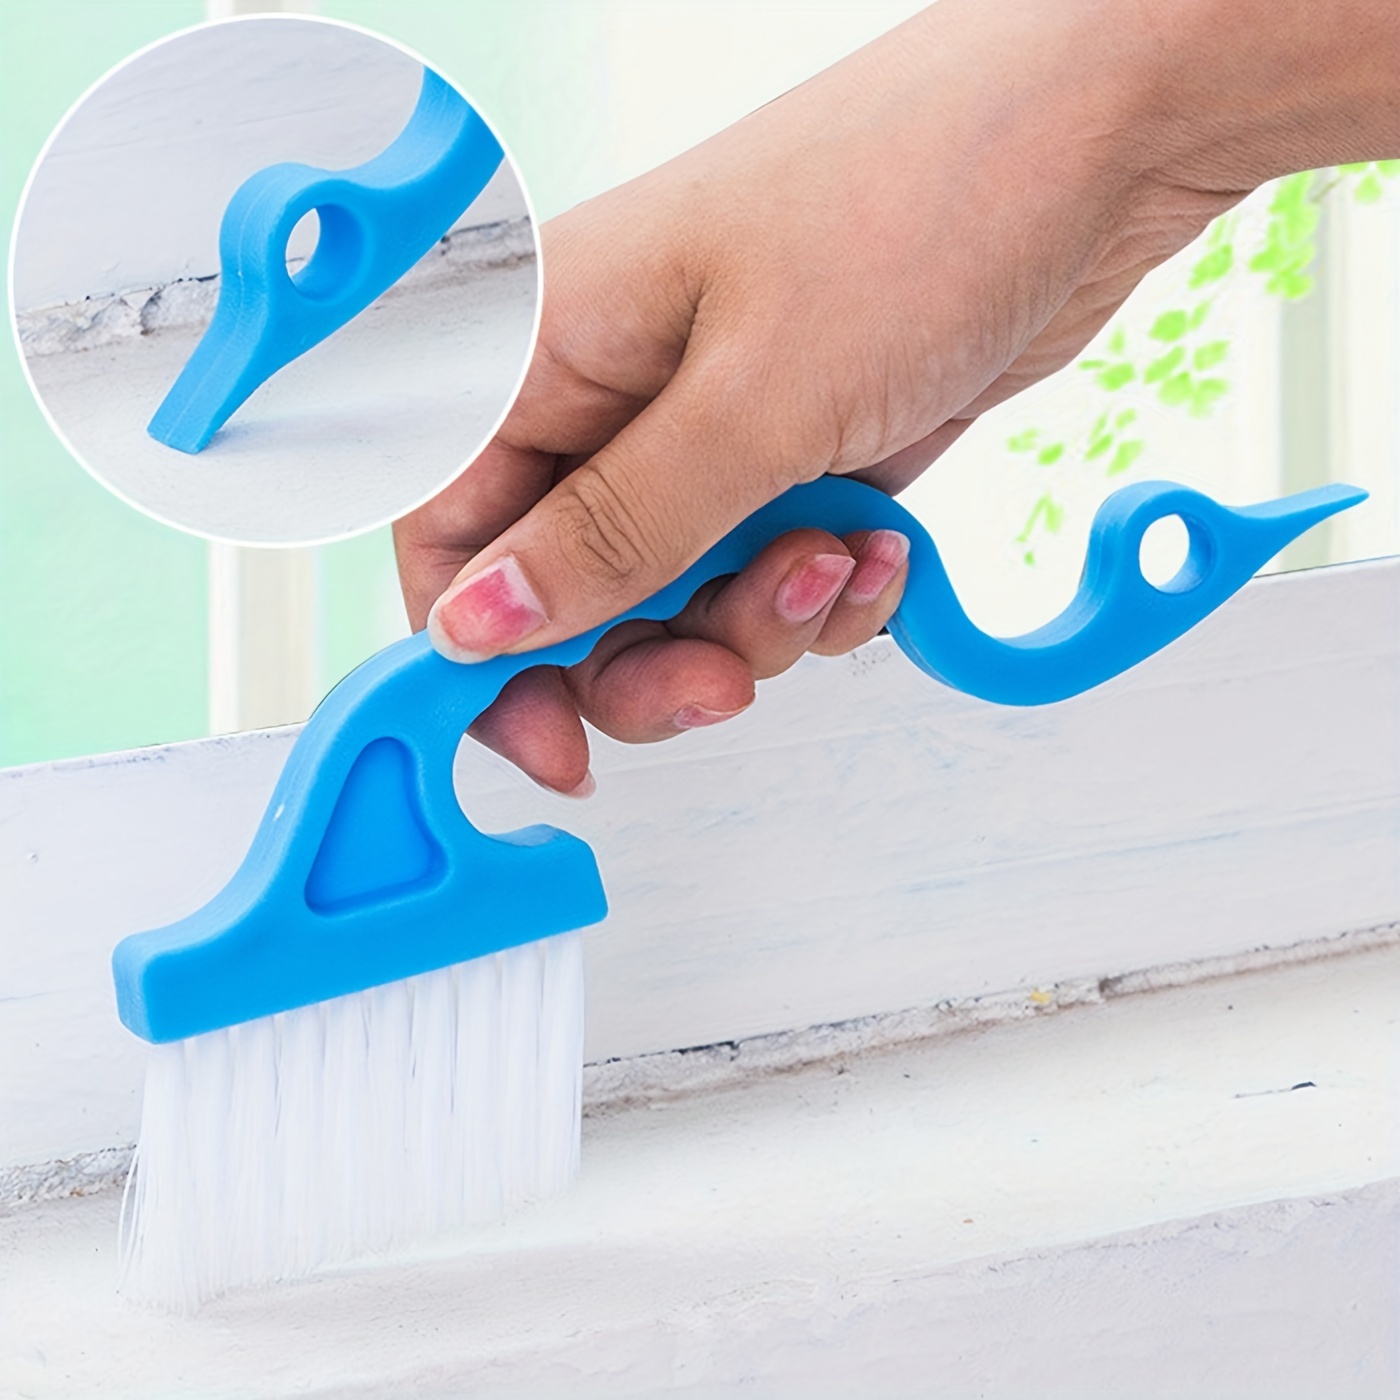 Crevice Cleaning Brush For Windows, Doors And Other Household